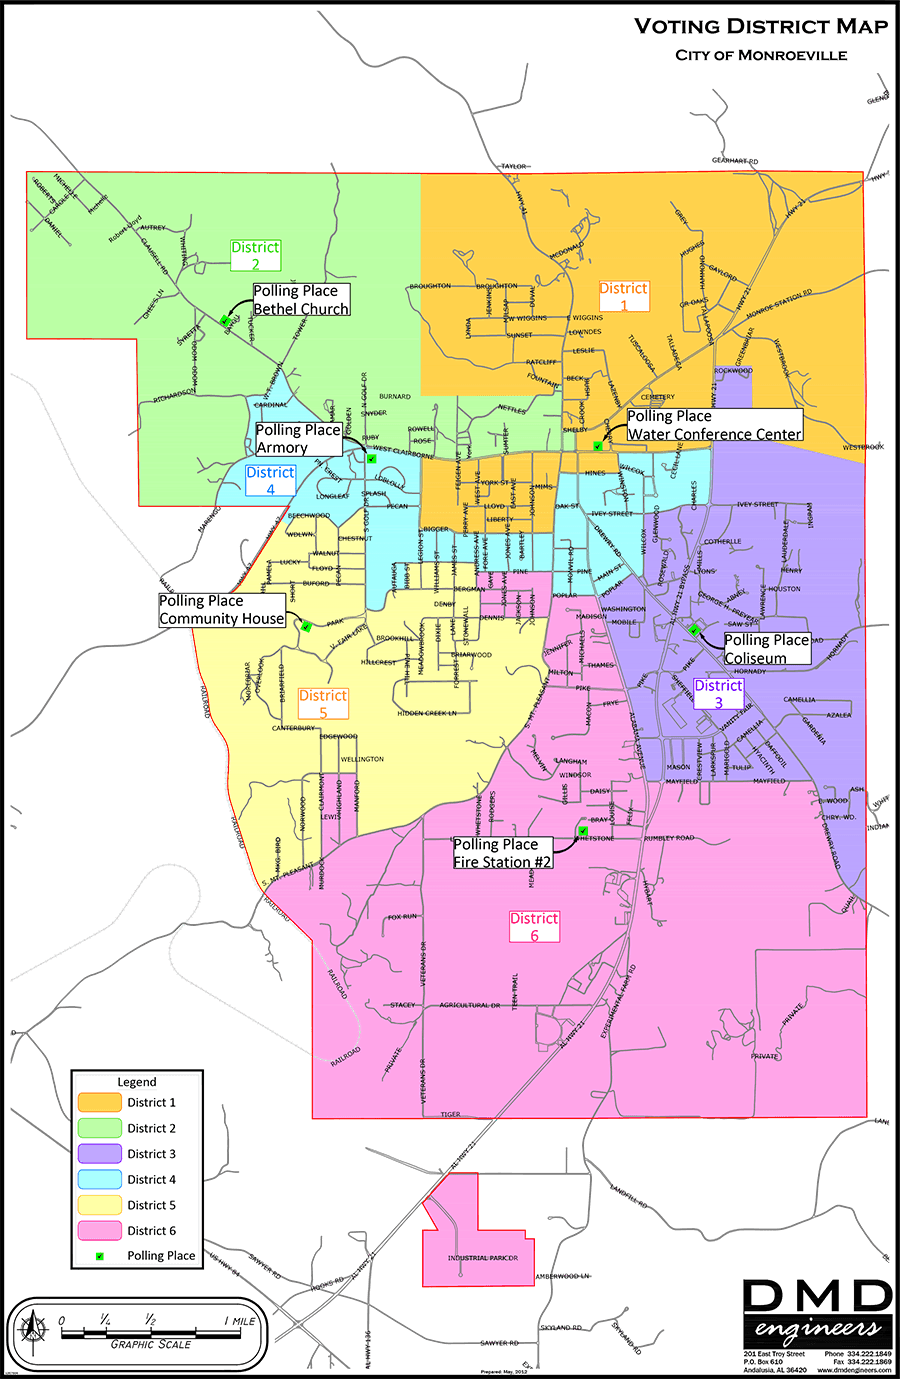 City of Monroeville District Map